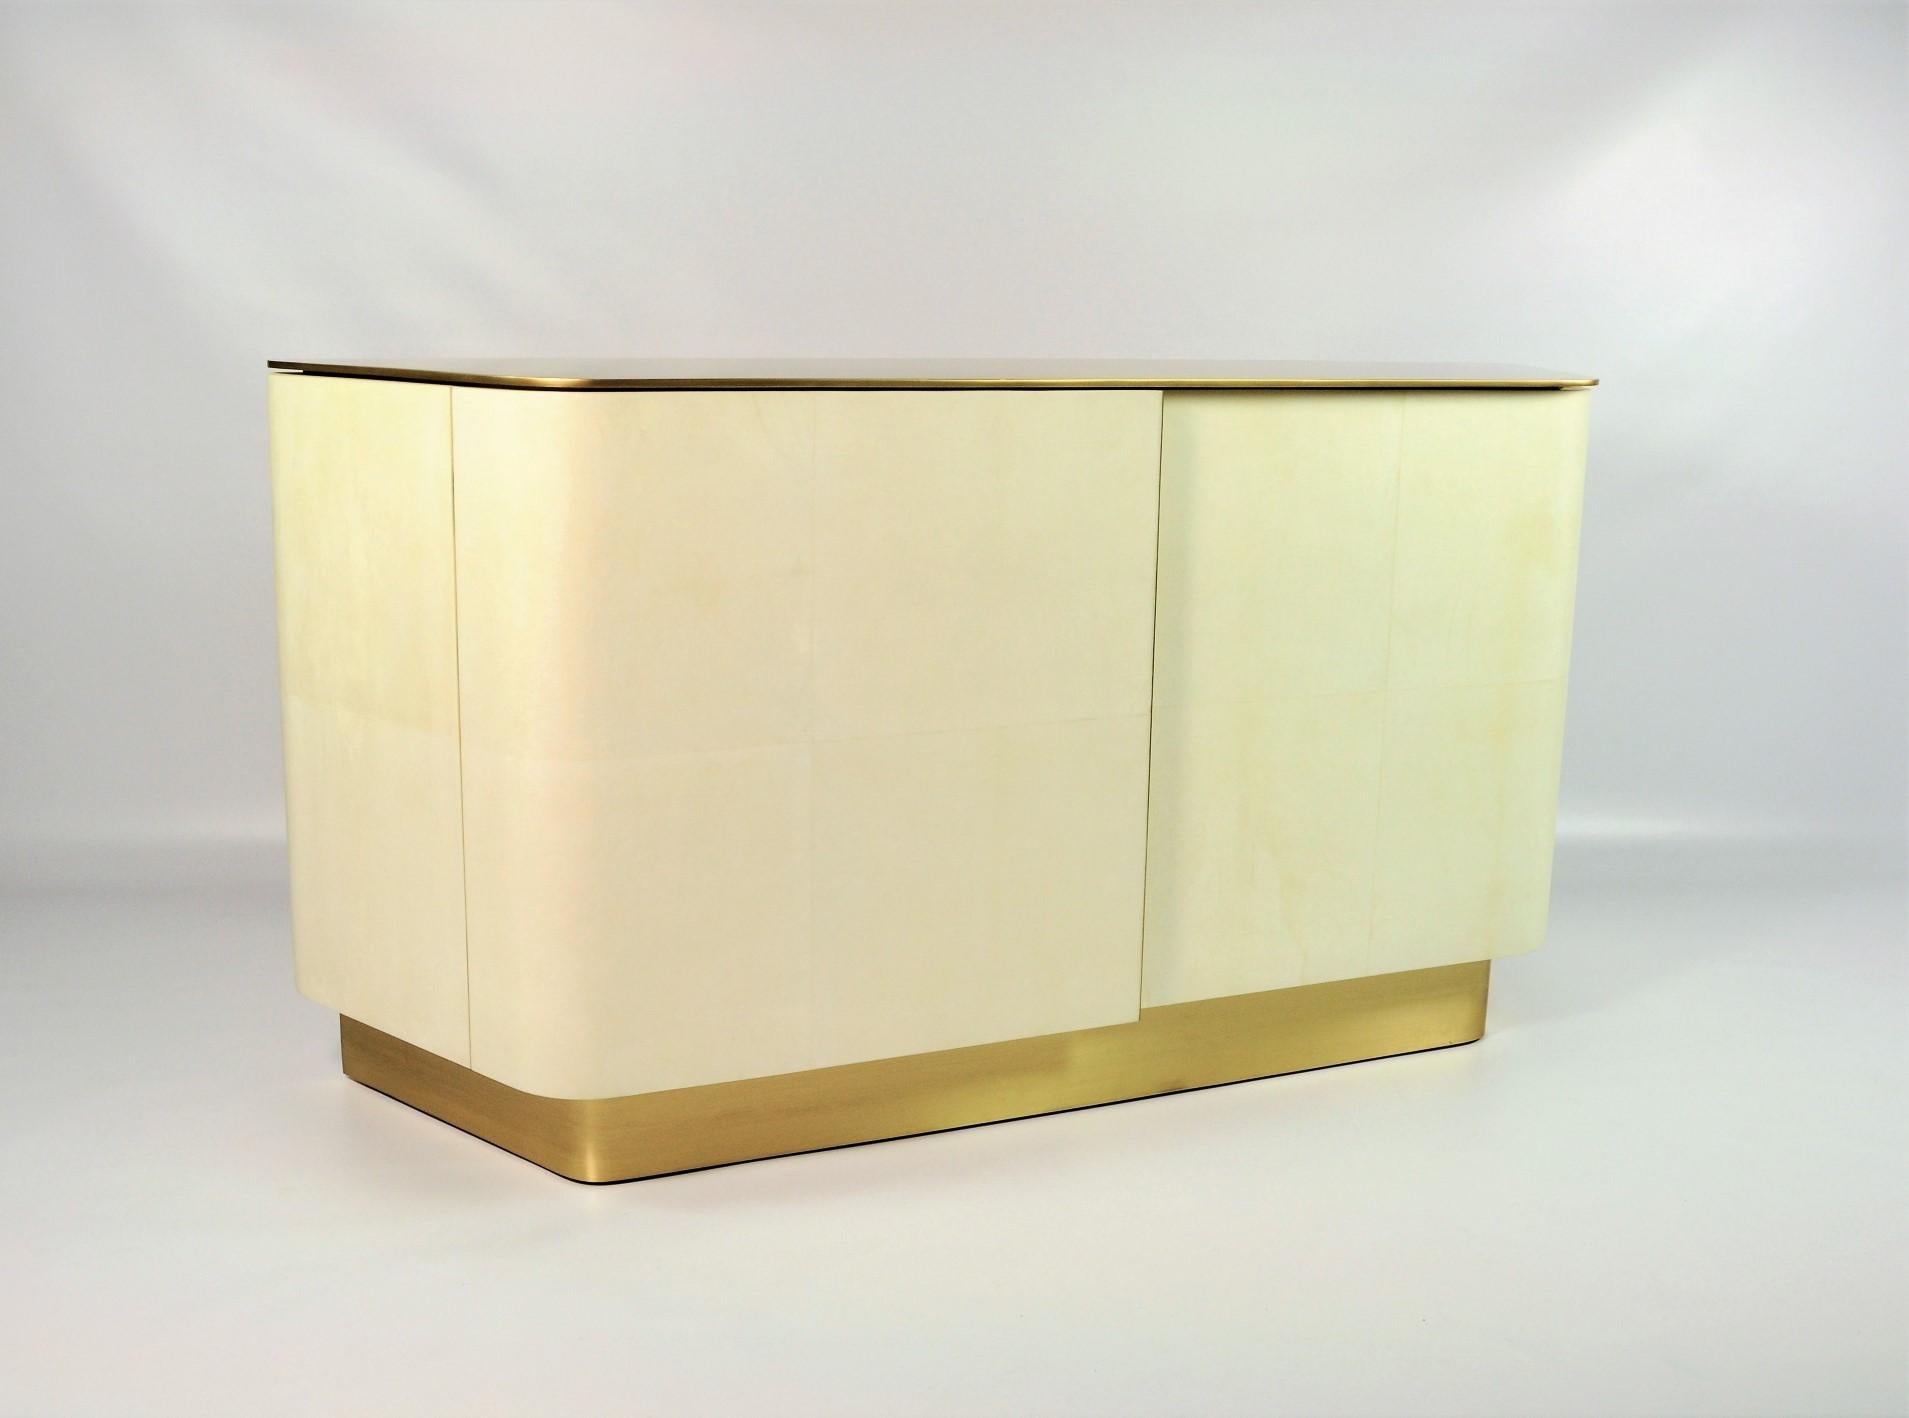 This modern buffet VELA is made of parchment (goatskin).
It has 2 doors, the top and the base are made of brushed brass.
This piece has a very sensual and modern design.
The parchment is bleached and has a satin finish with a soft touch.
The